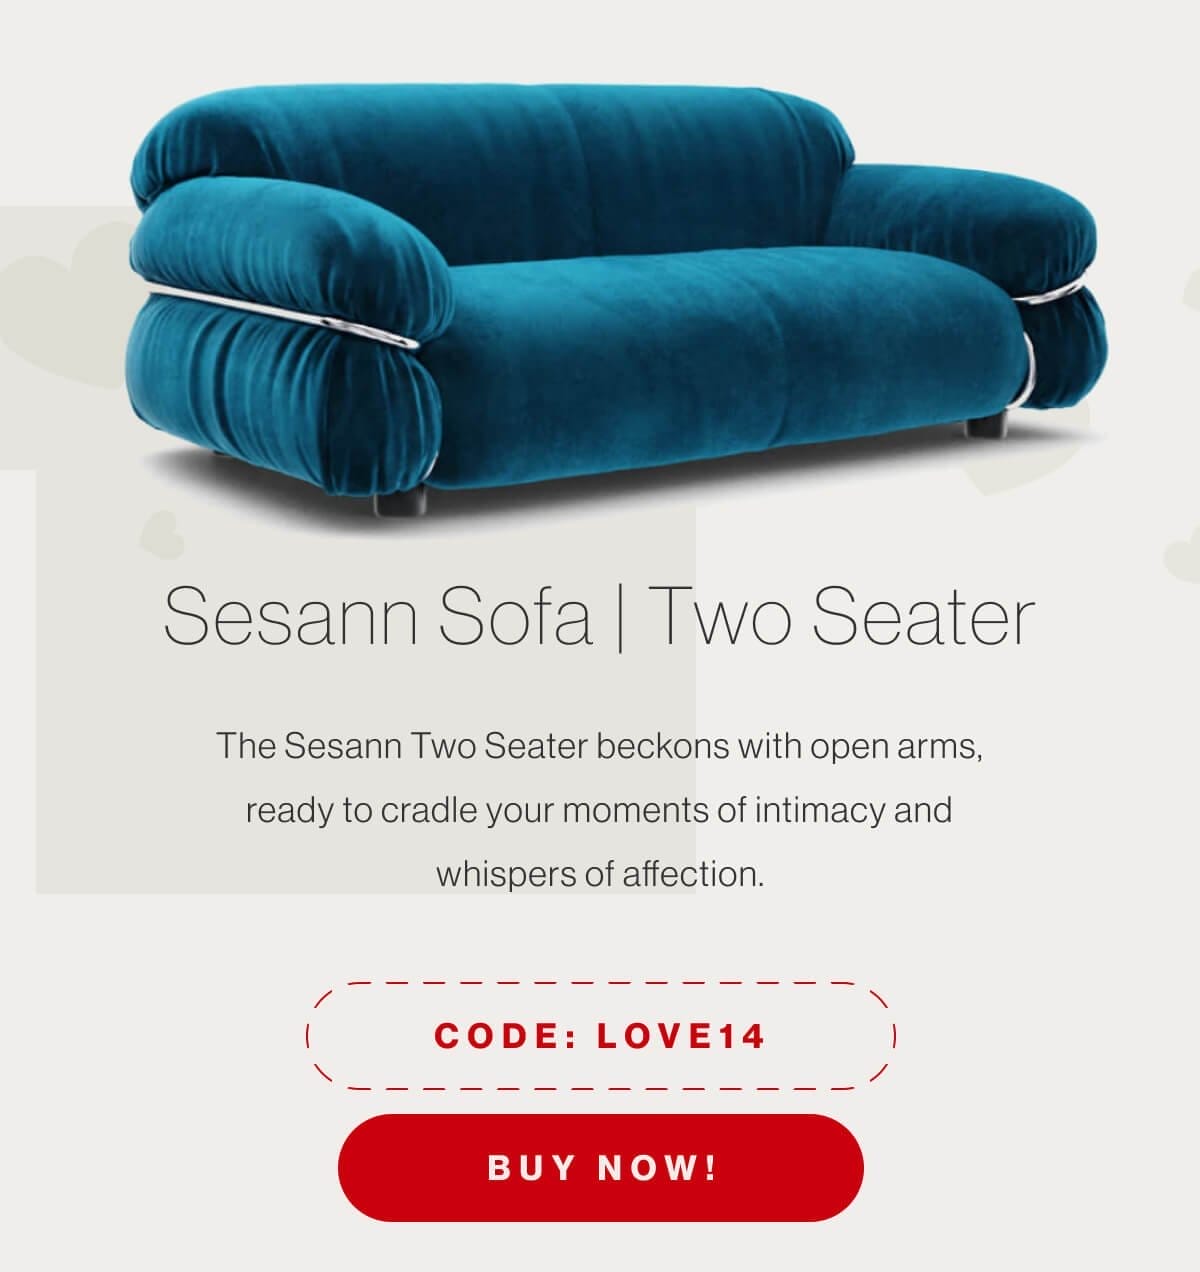 Sesann Sofa Two Seater - The Sesann Two Seater beckons with open arms, ready to cradle your moments of intimacy and whispers of affection. - Code: LOVE14 - Buy Now!